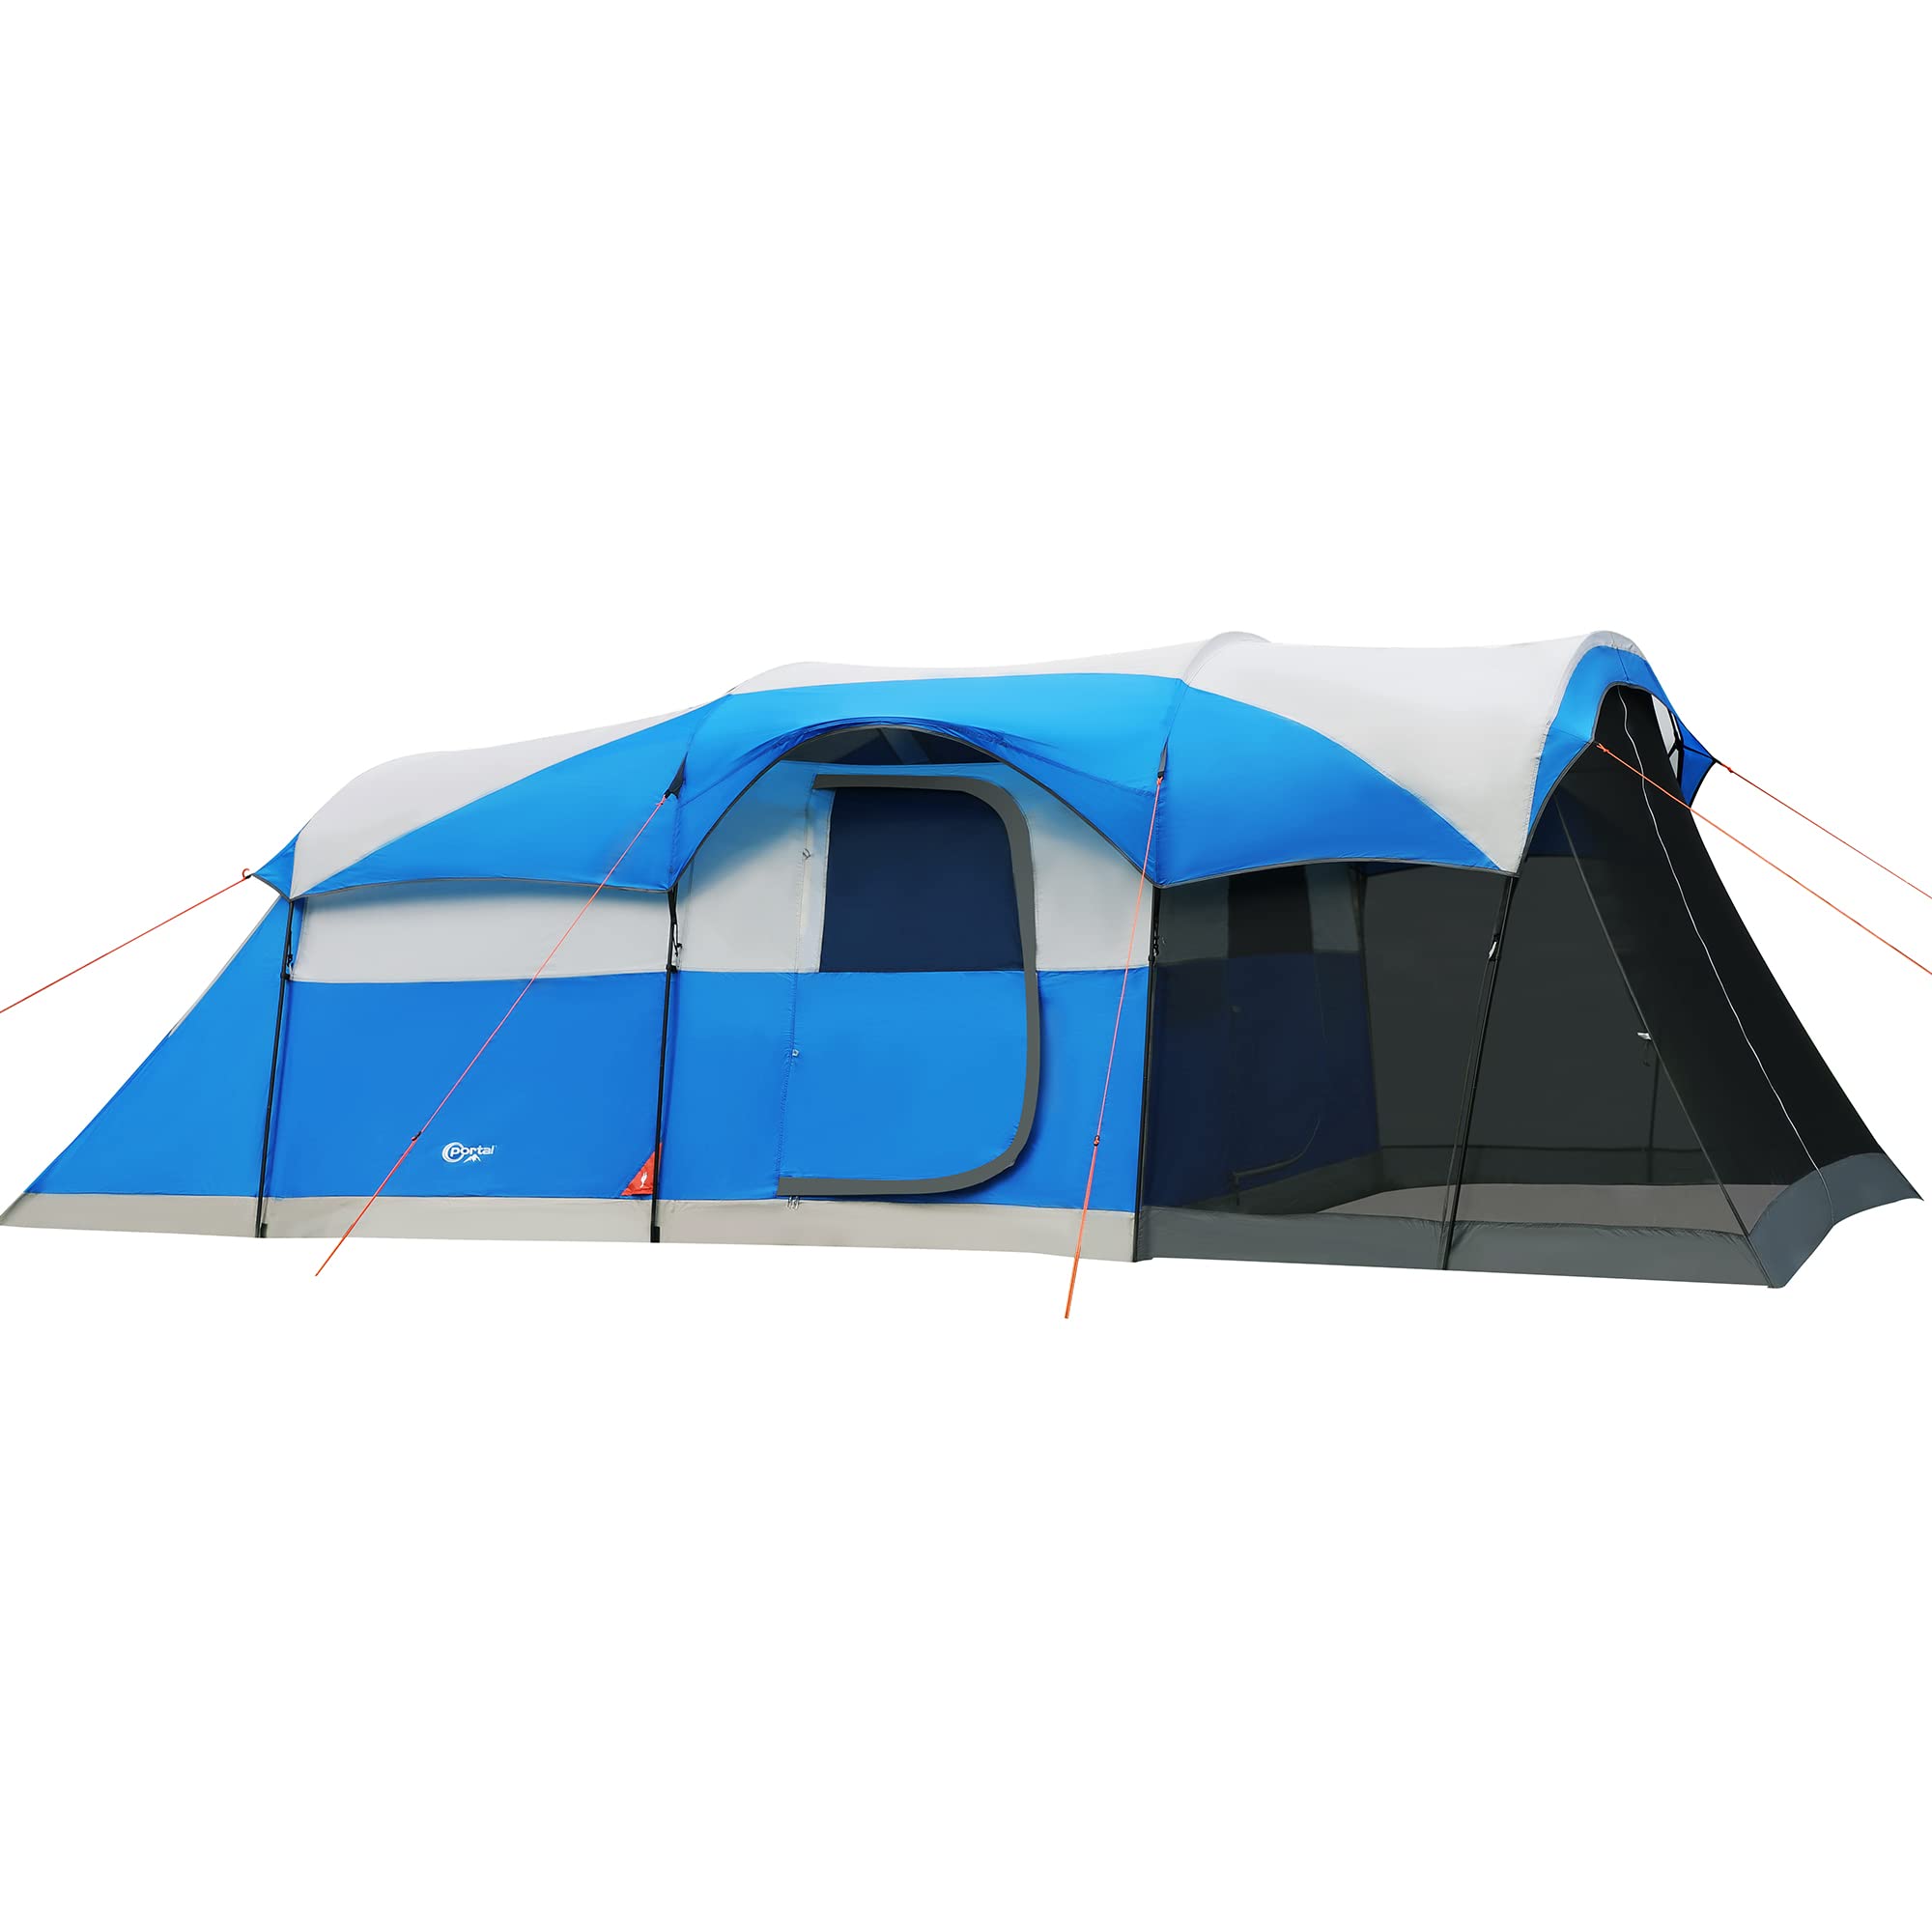 PORTAL 8 Person Family Camping Tent